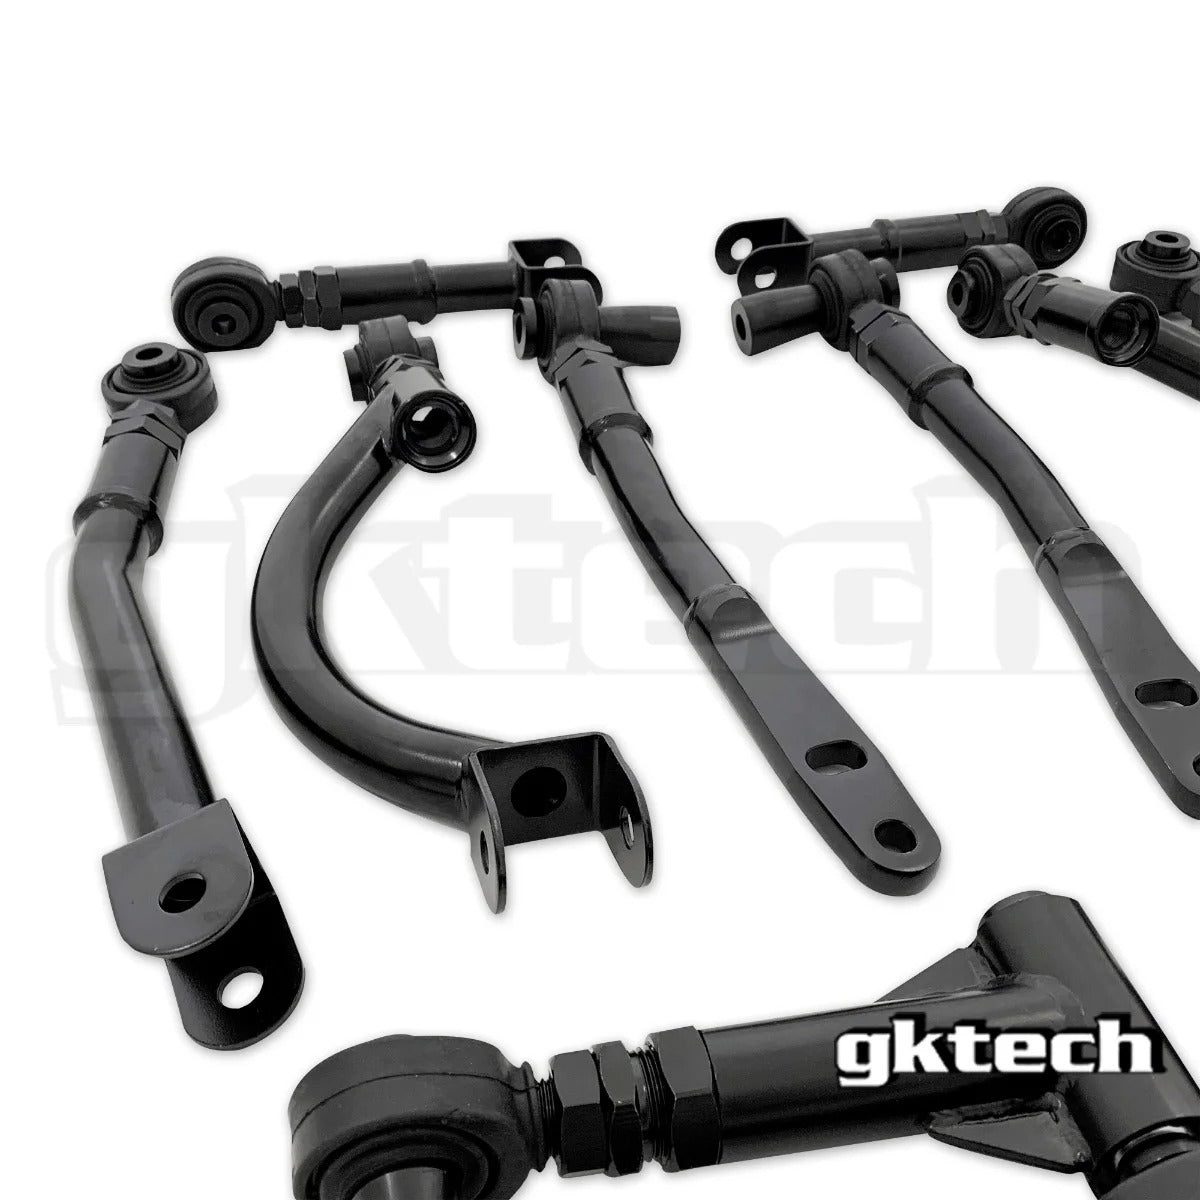 R32 Skyline Suspension arm package (10% combo discount)